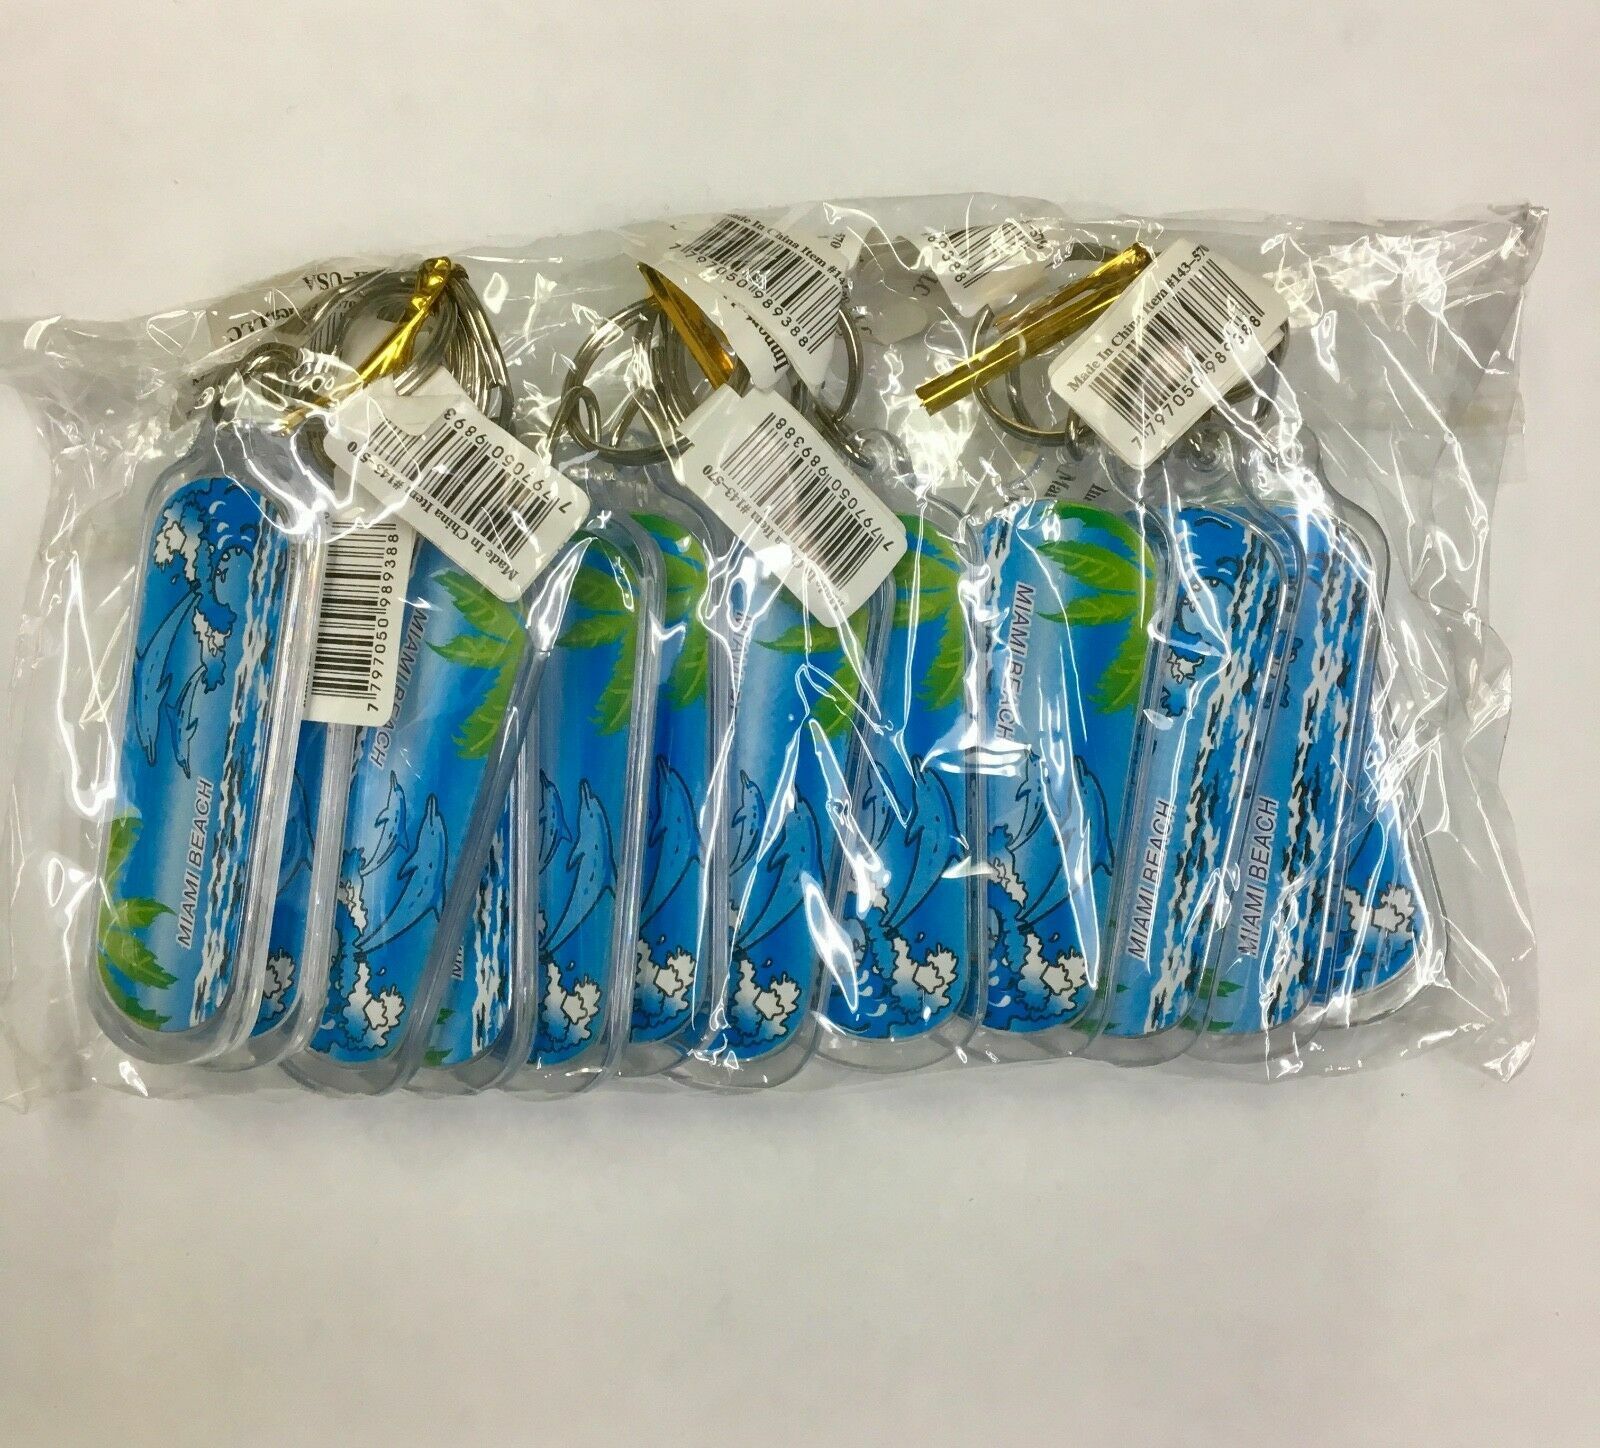 12 Pieces  Miami Beach Souvenir Keychain Plastic Double Sided New, Great Gift